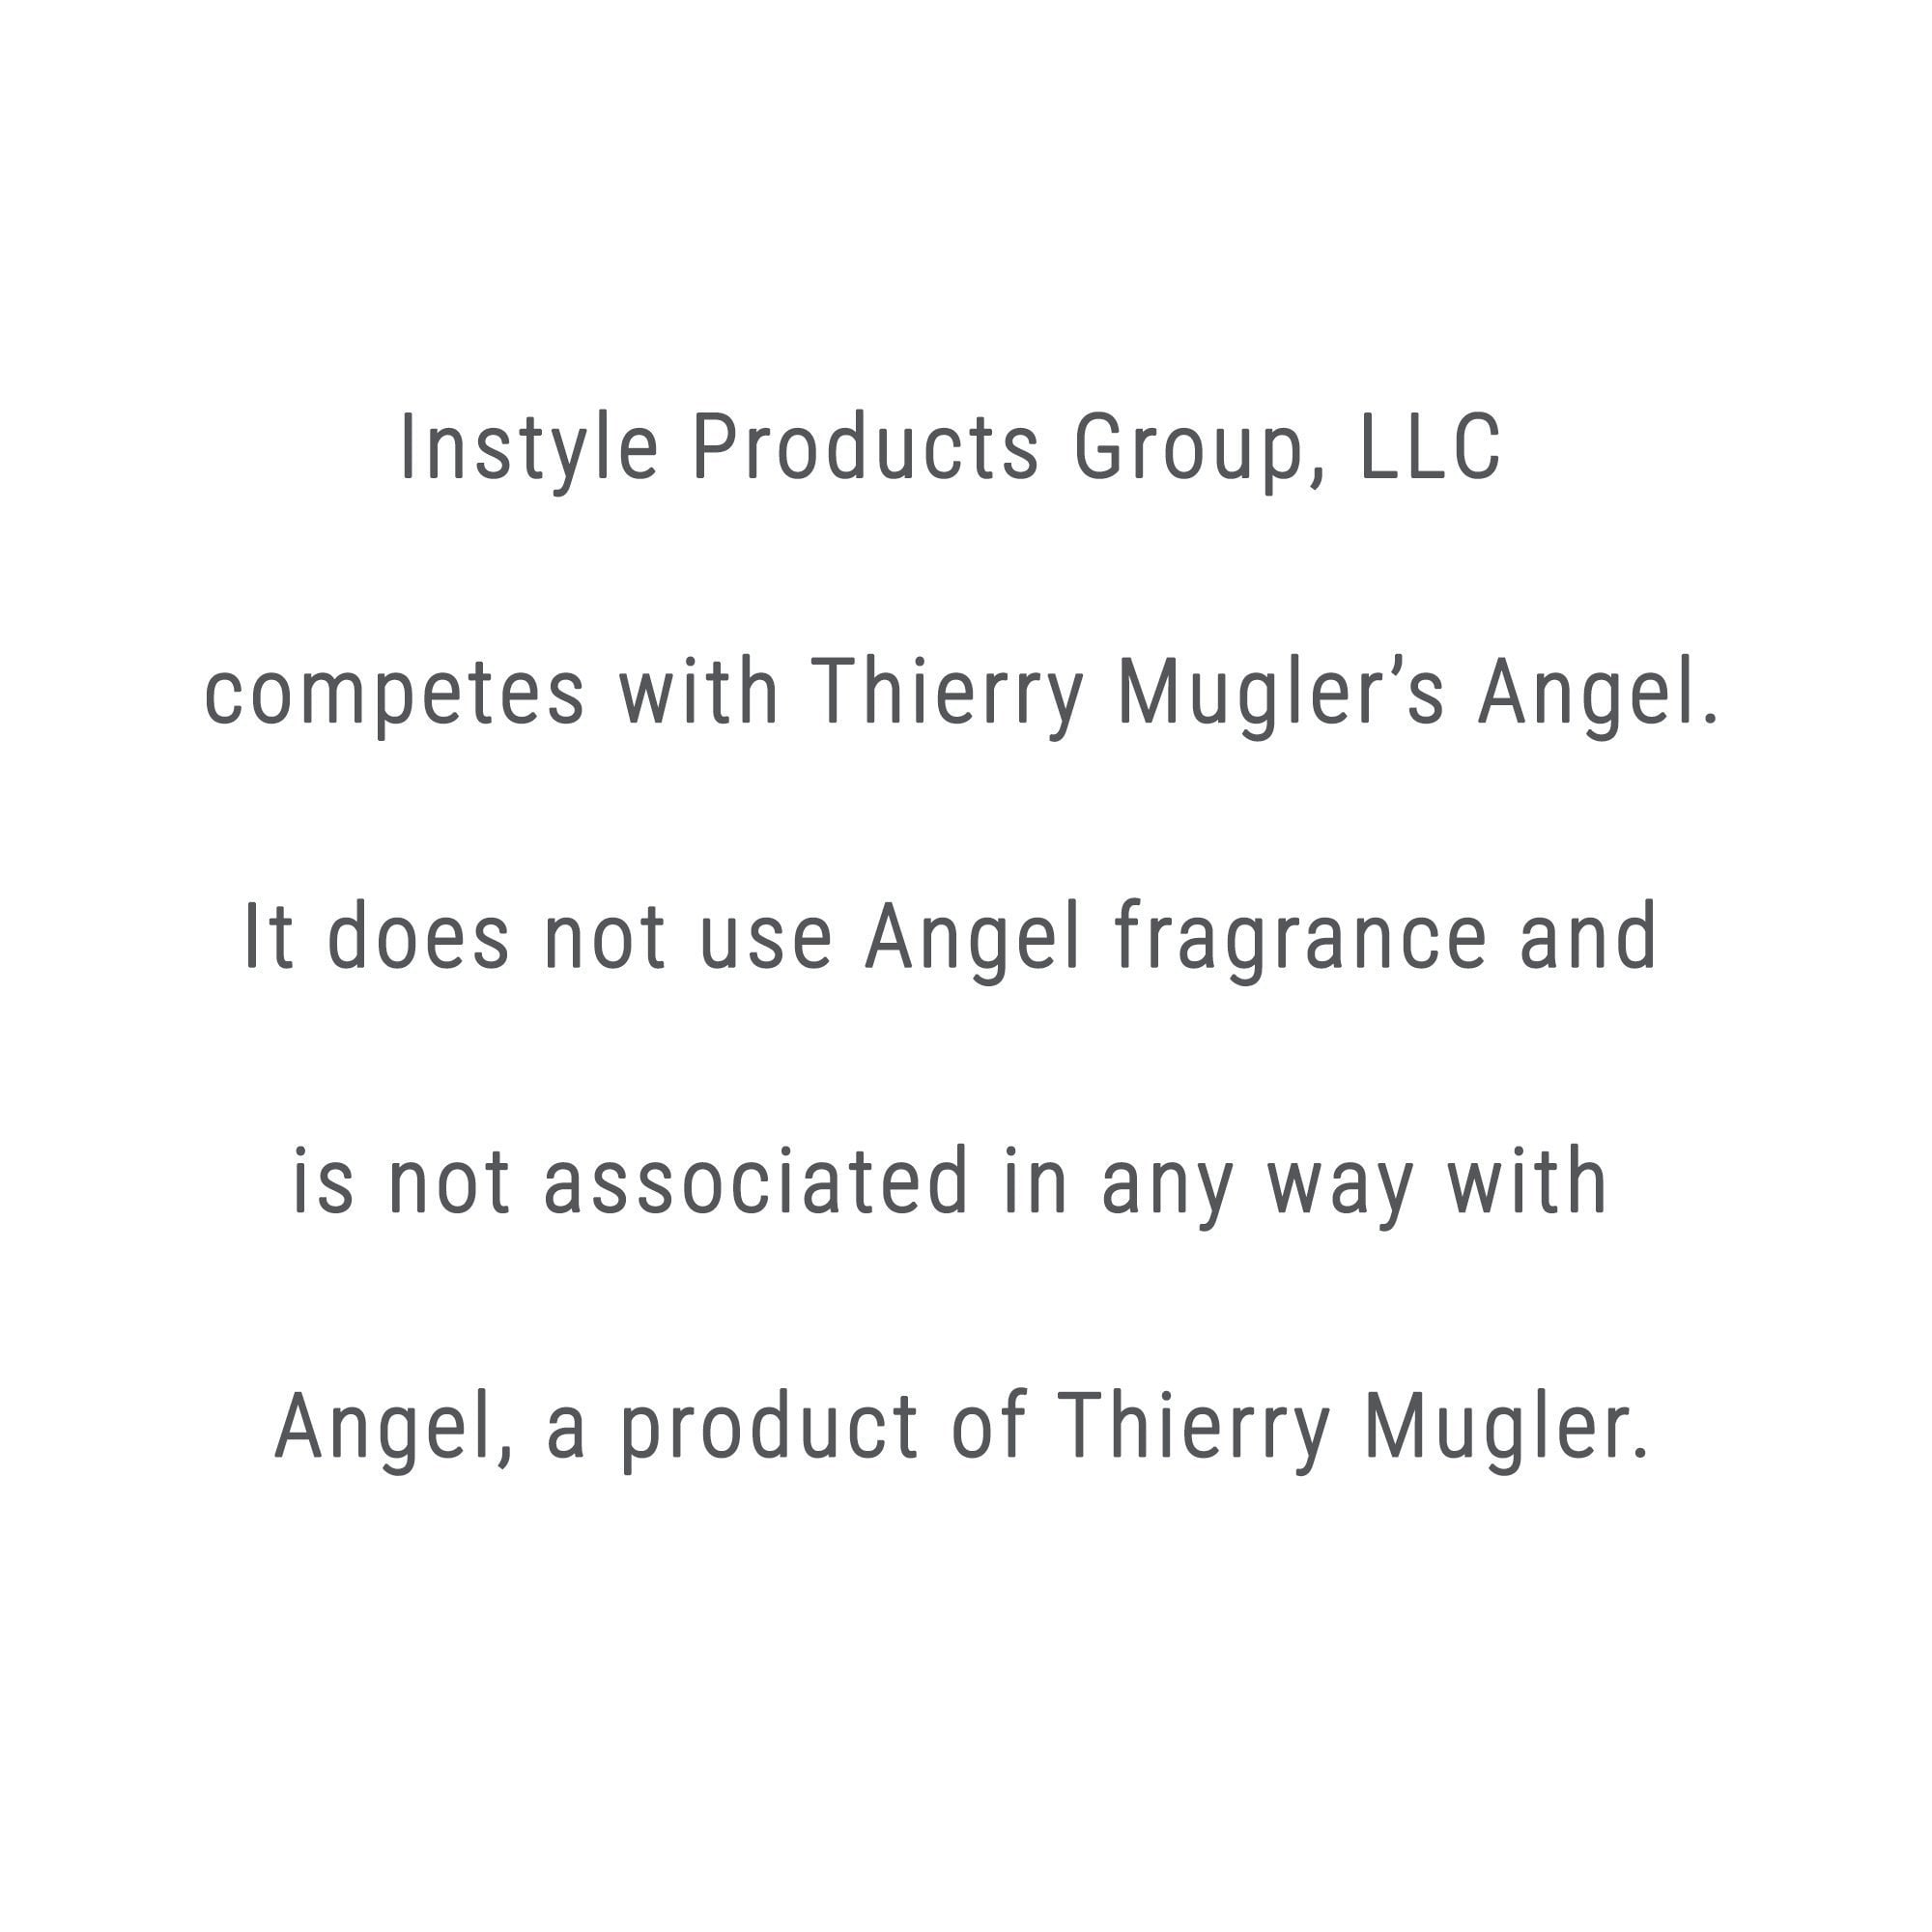 Perfect Scents - Inspired by Thierry Mugler's Angel - Instyle